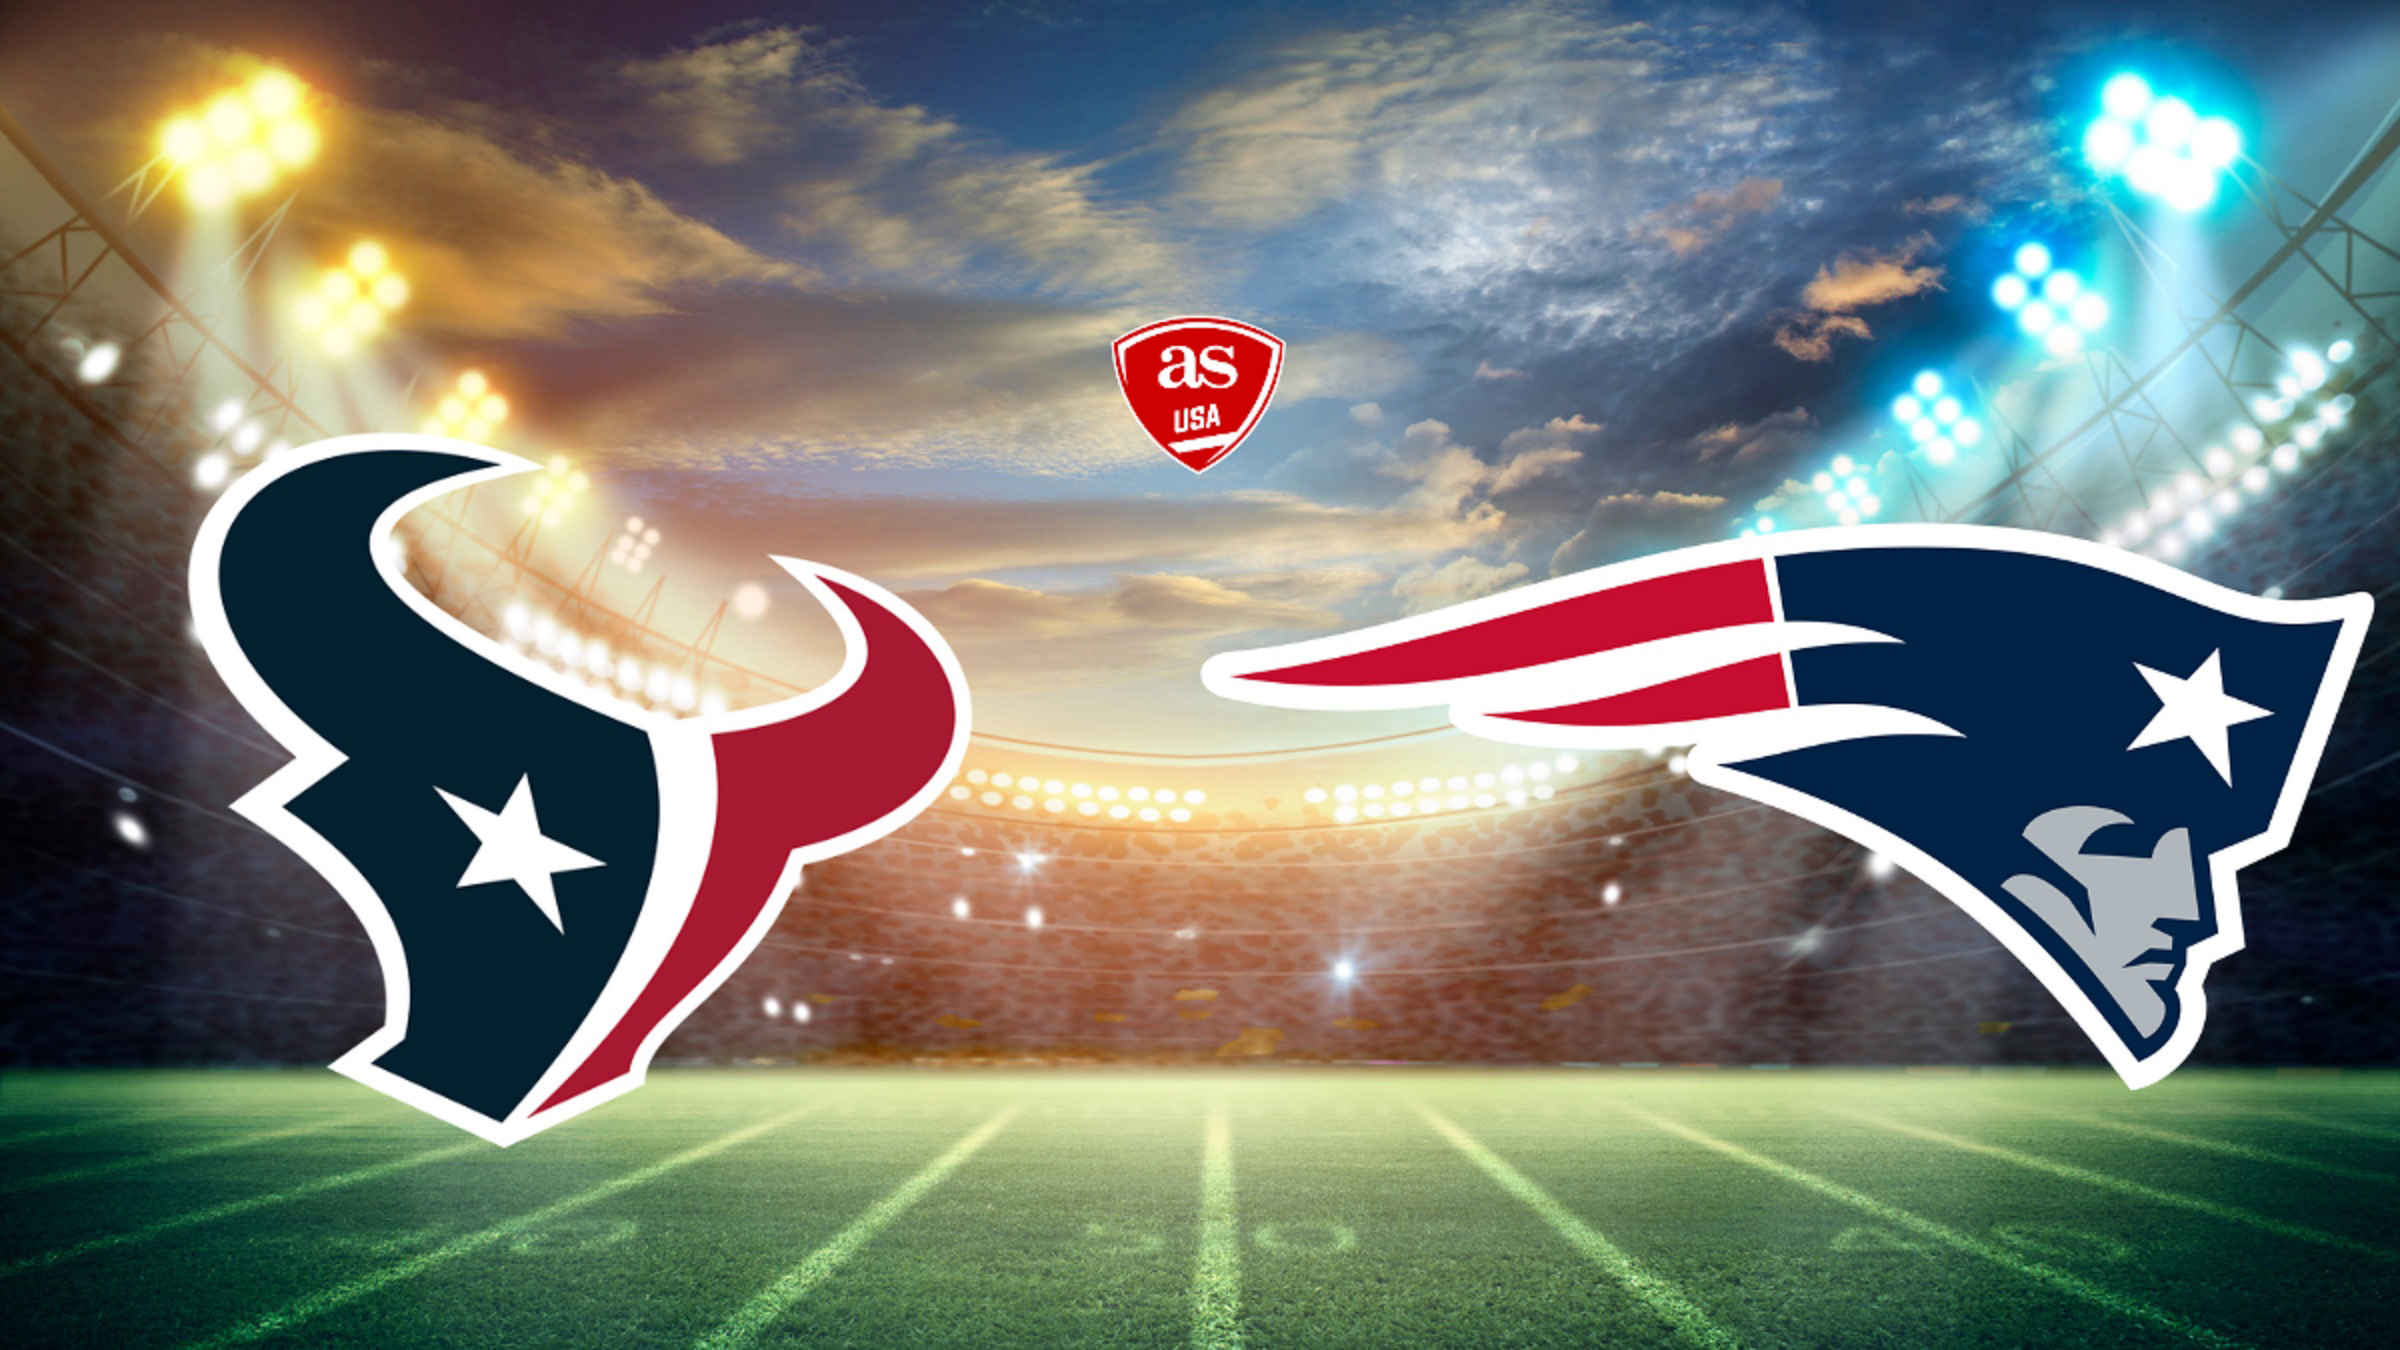 Houston Texans vs New England Patriots times, how to watch on TV